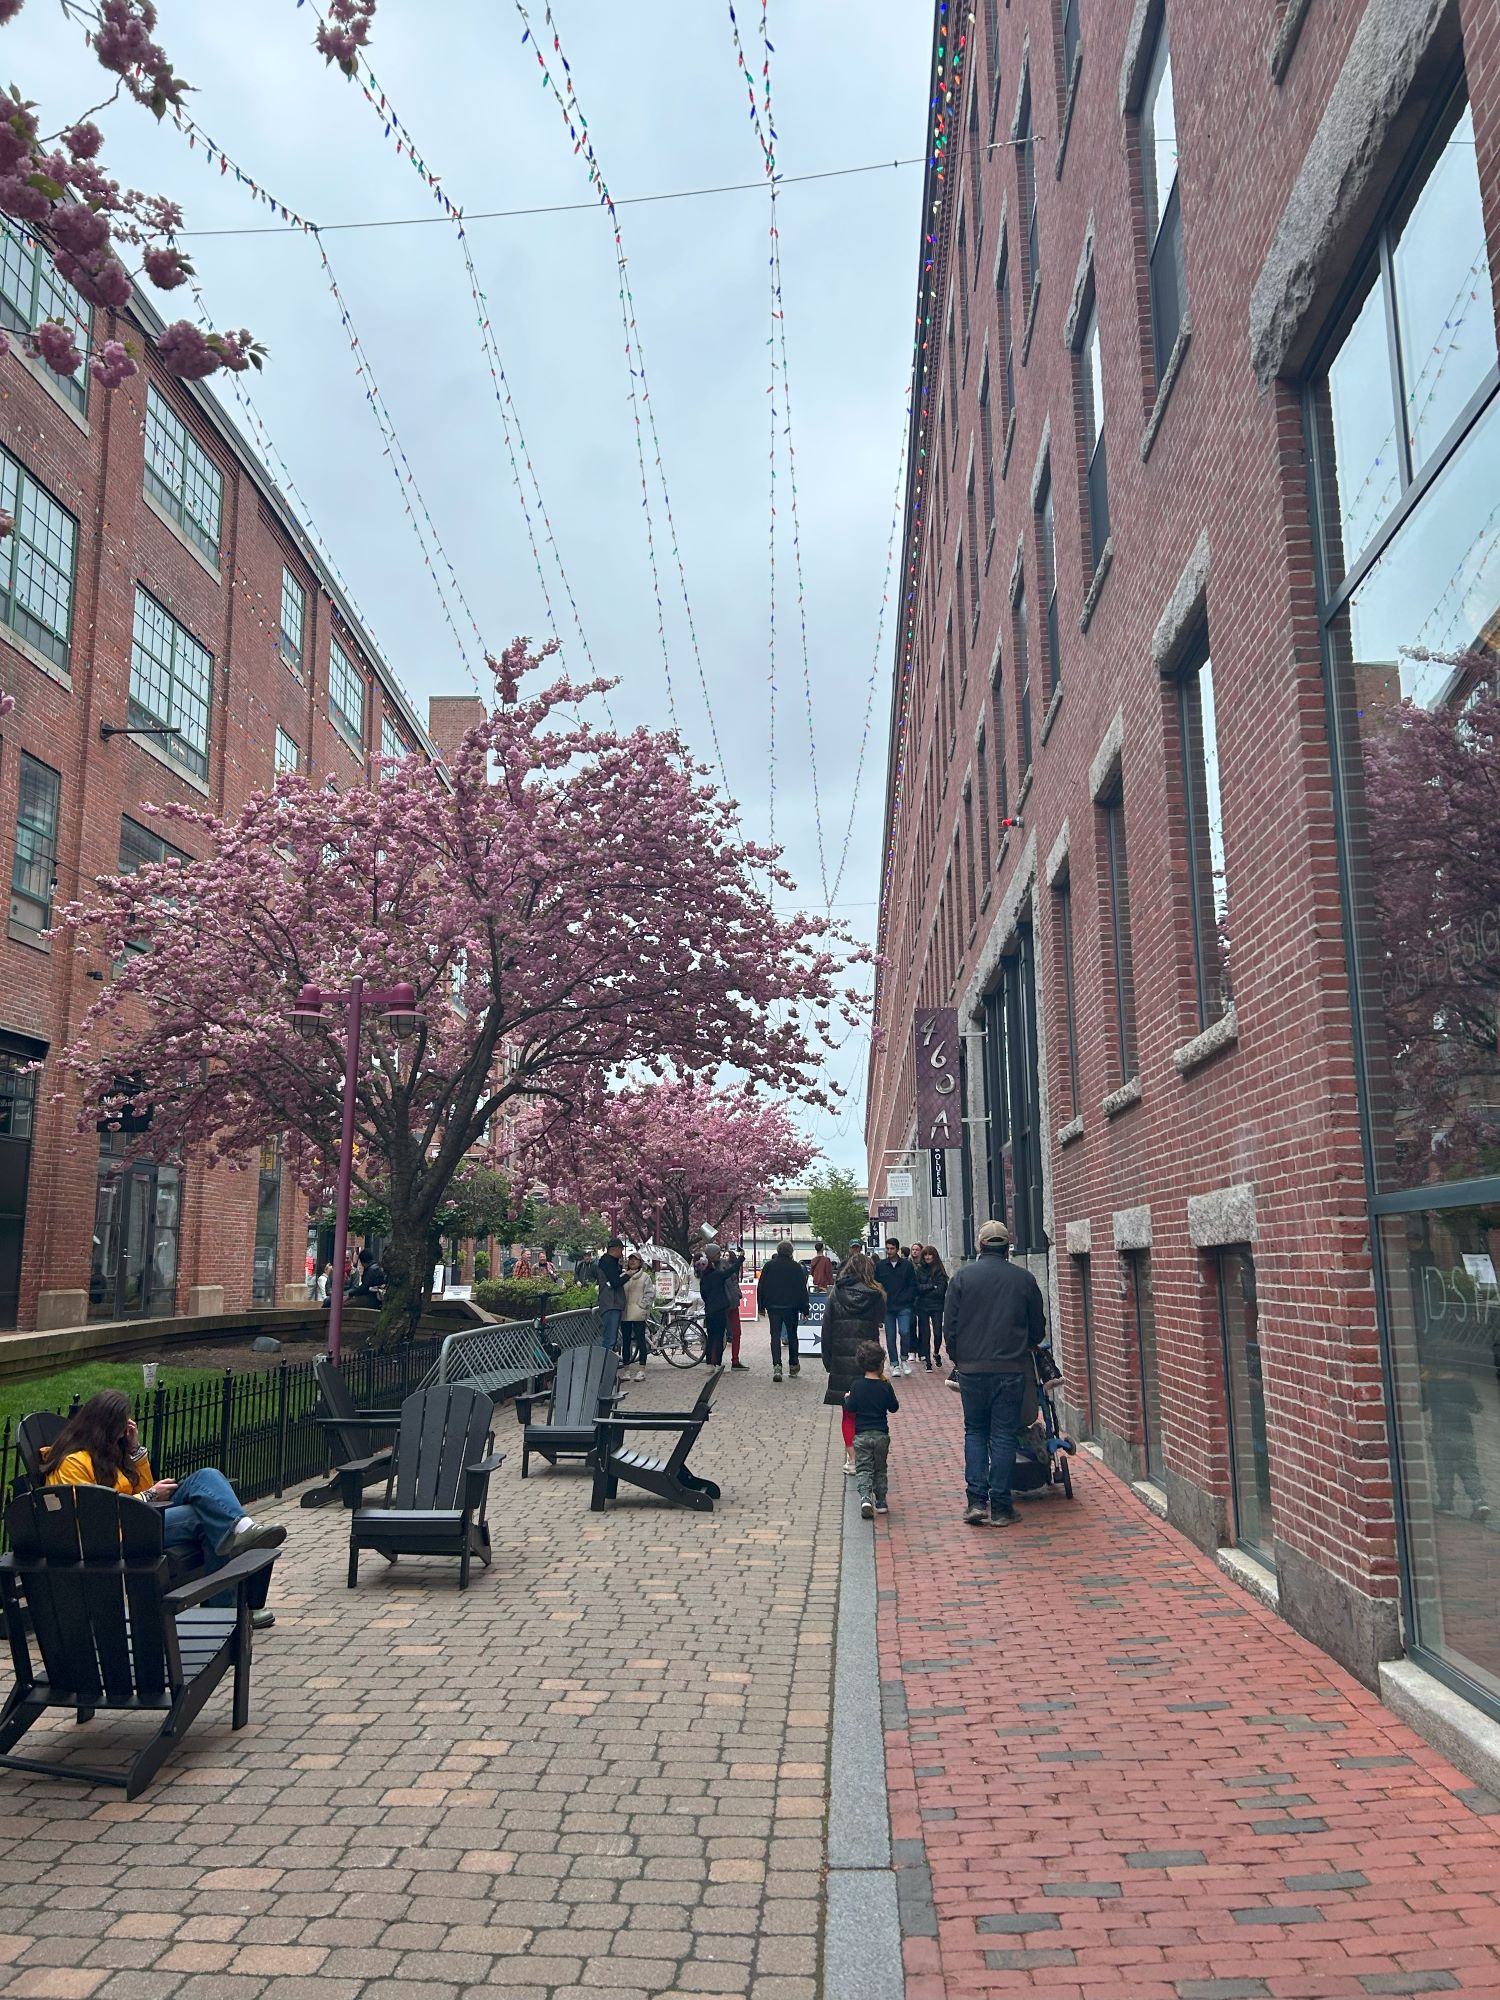 A brick alley with people strolling through. On either side are large brick buildings, and on the left are trees with pink blossoms